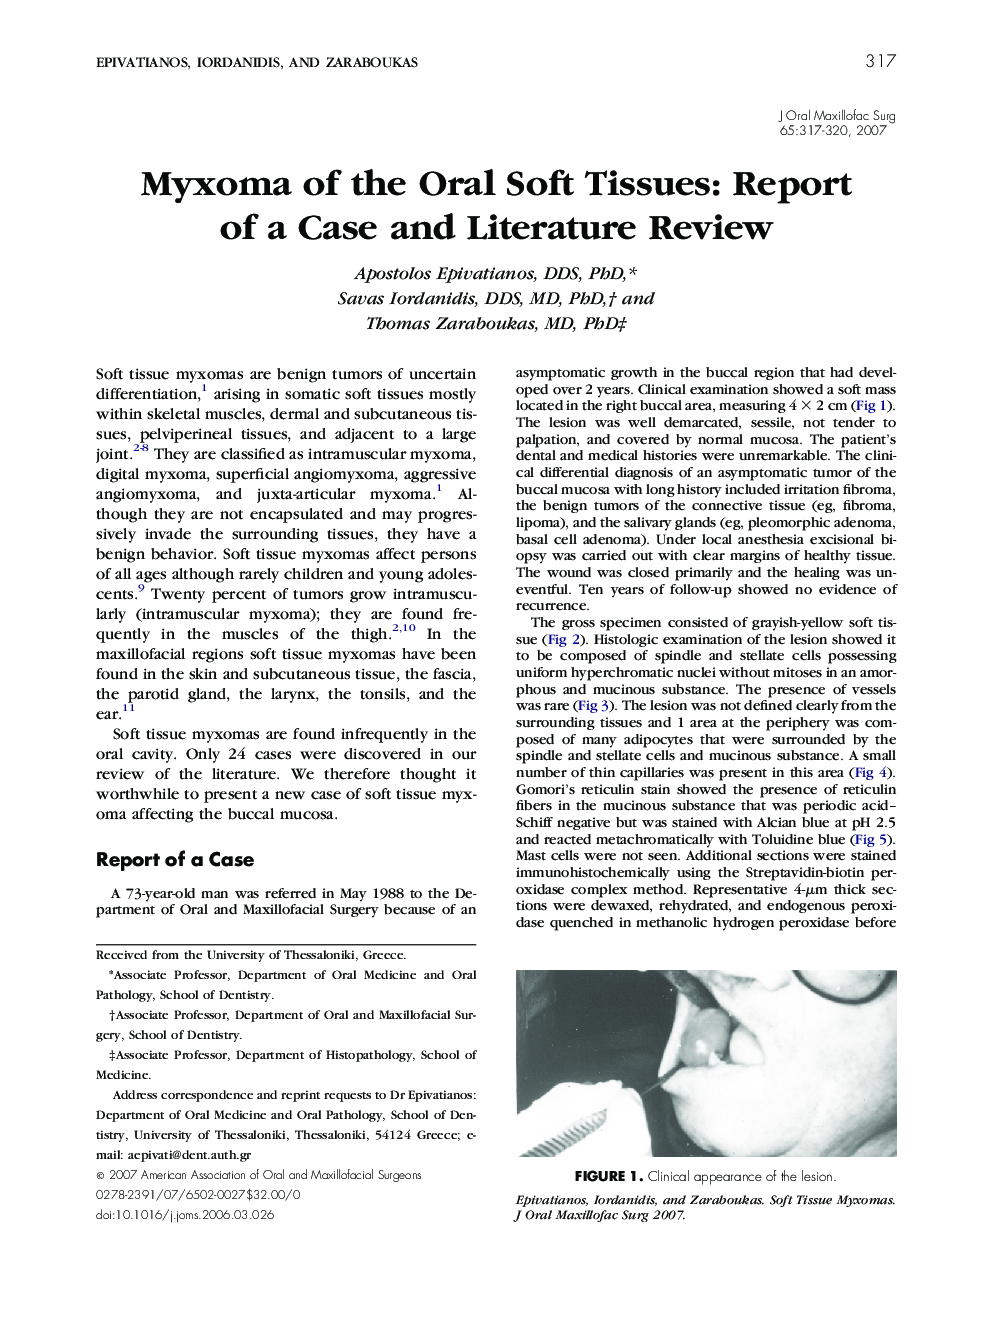 Myxoma of the Oral Soft Tissues: Report of a Case and Literature Review